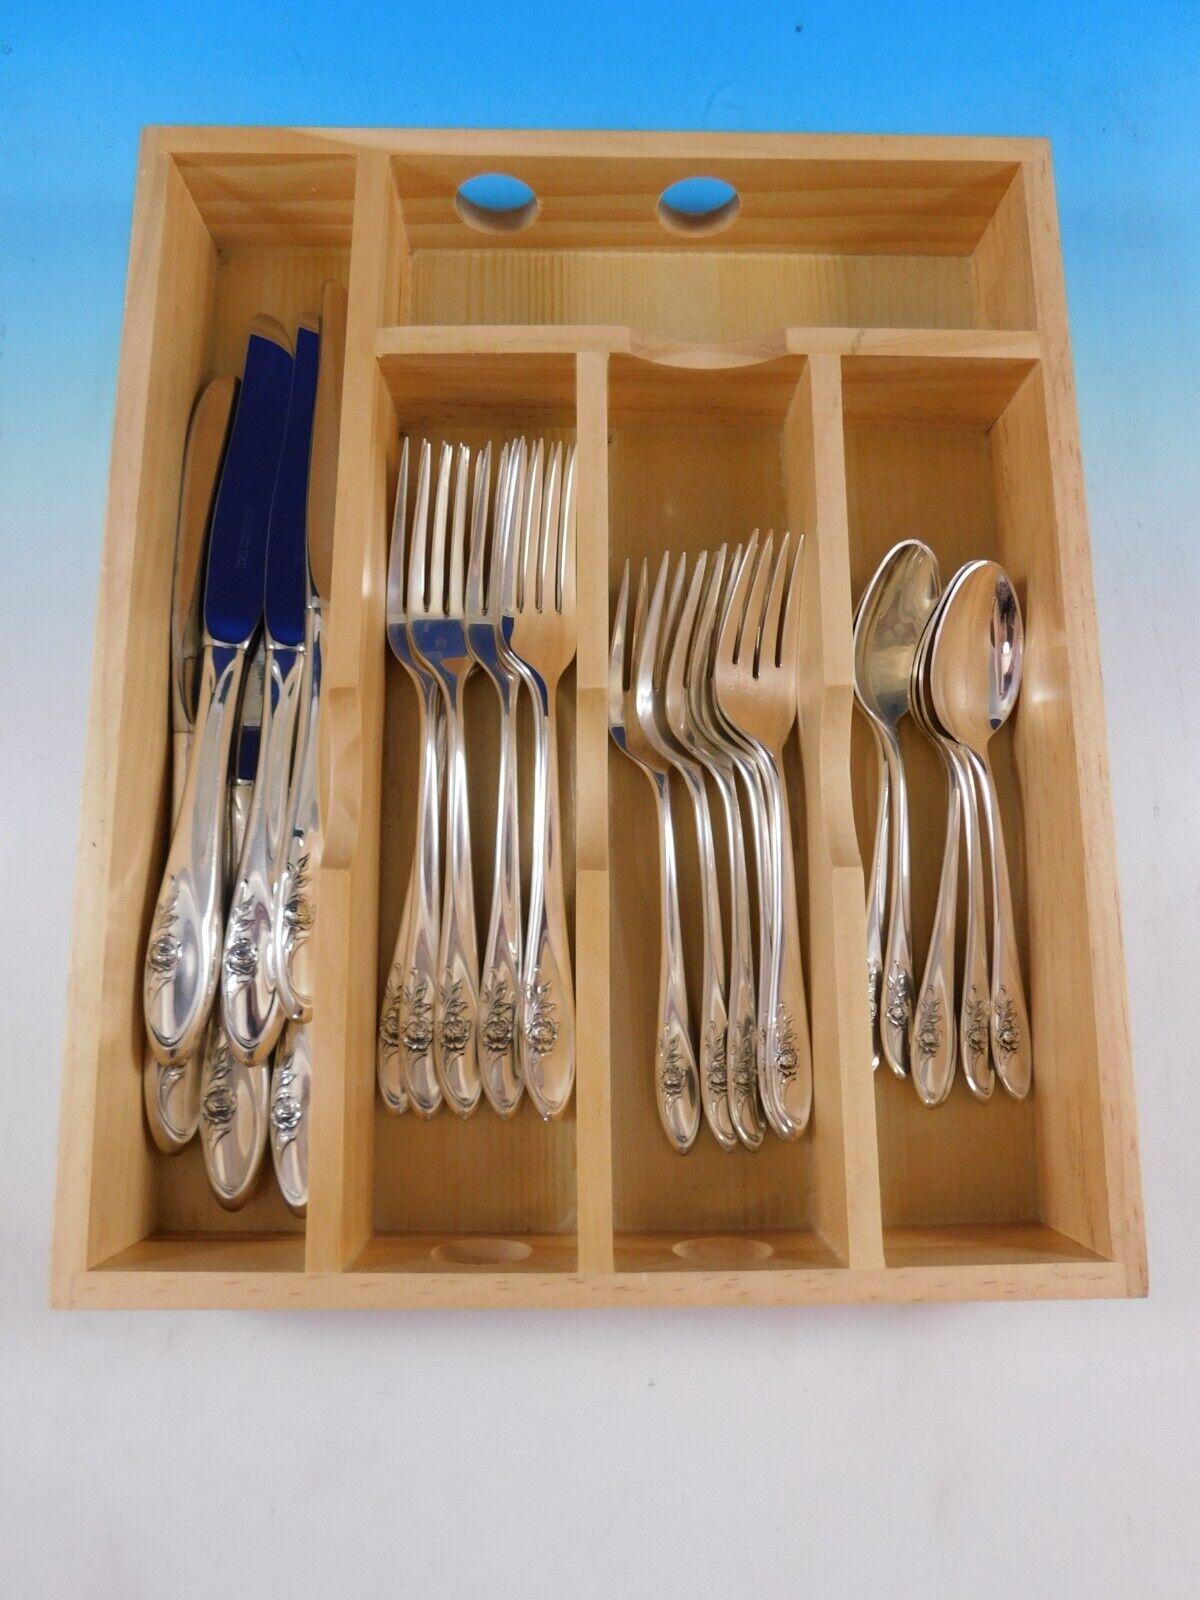 Exquisite Sculptured Rose by Towle Sterling Silver Flatware set - 24 pieces. This set includes:

6 Knives, 9 1/8